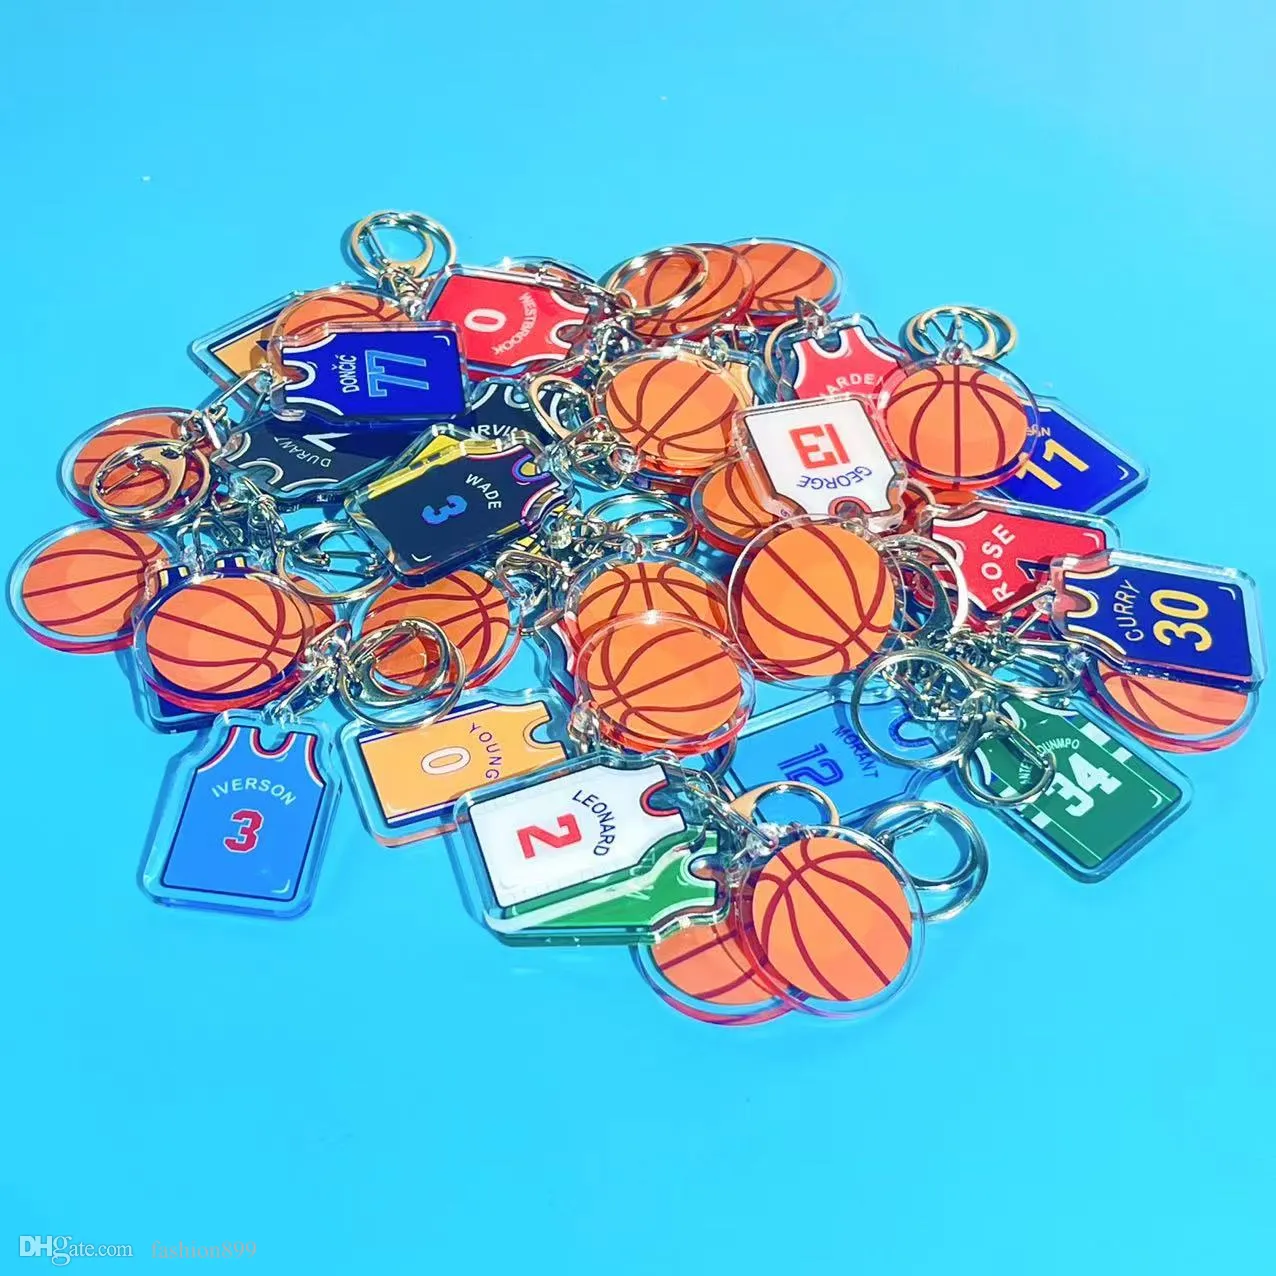 New Printed On Jersey Shape Keychain Charms Sports Key Ring for men's and women's children Basketball Fan Trinket Souvenir Accessories Gift